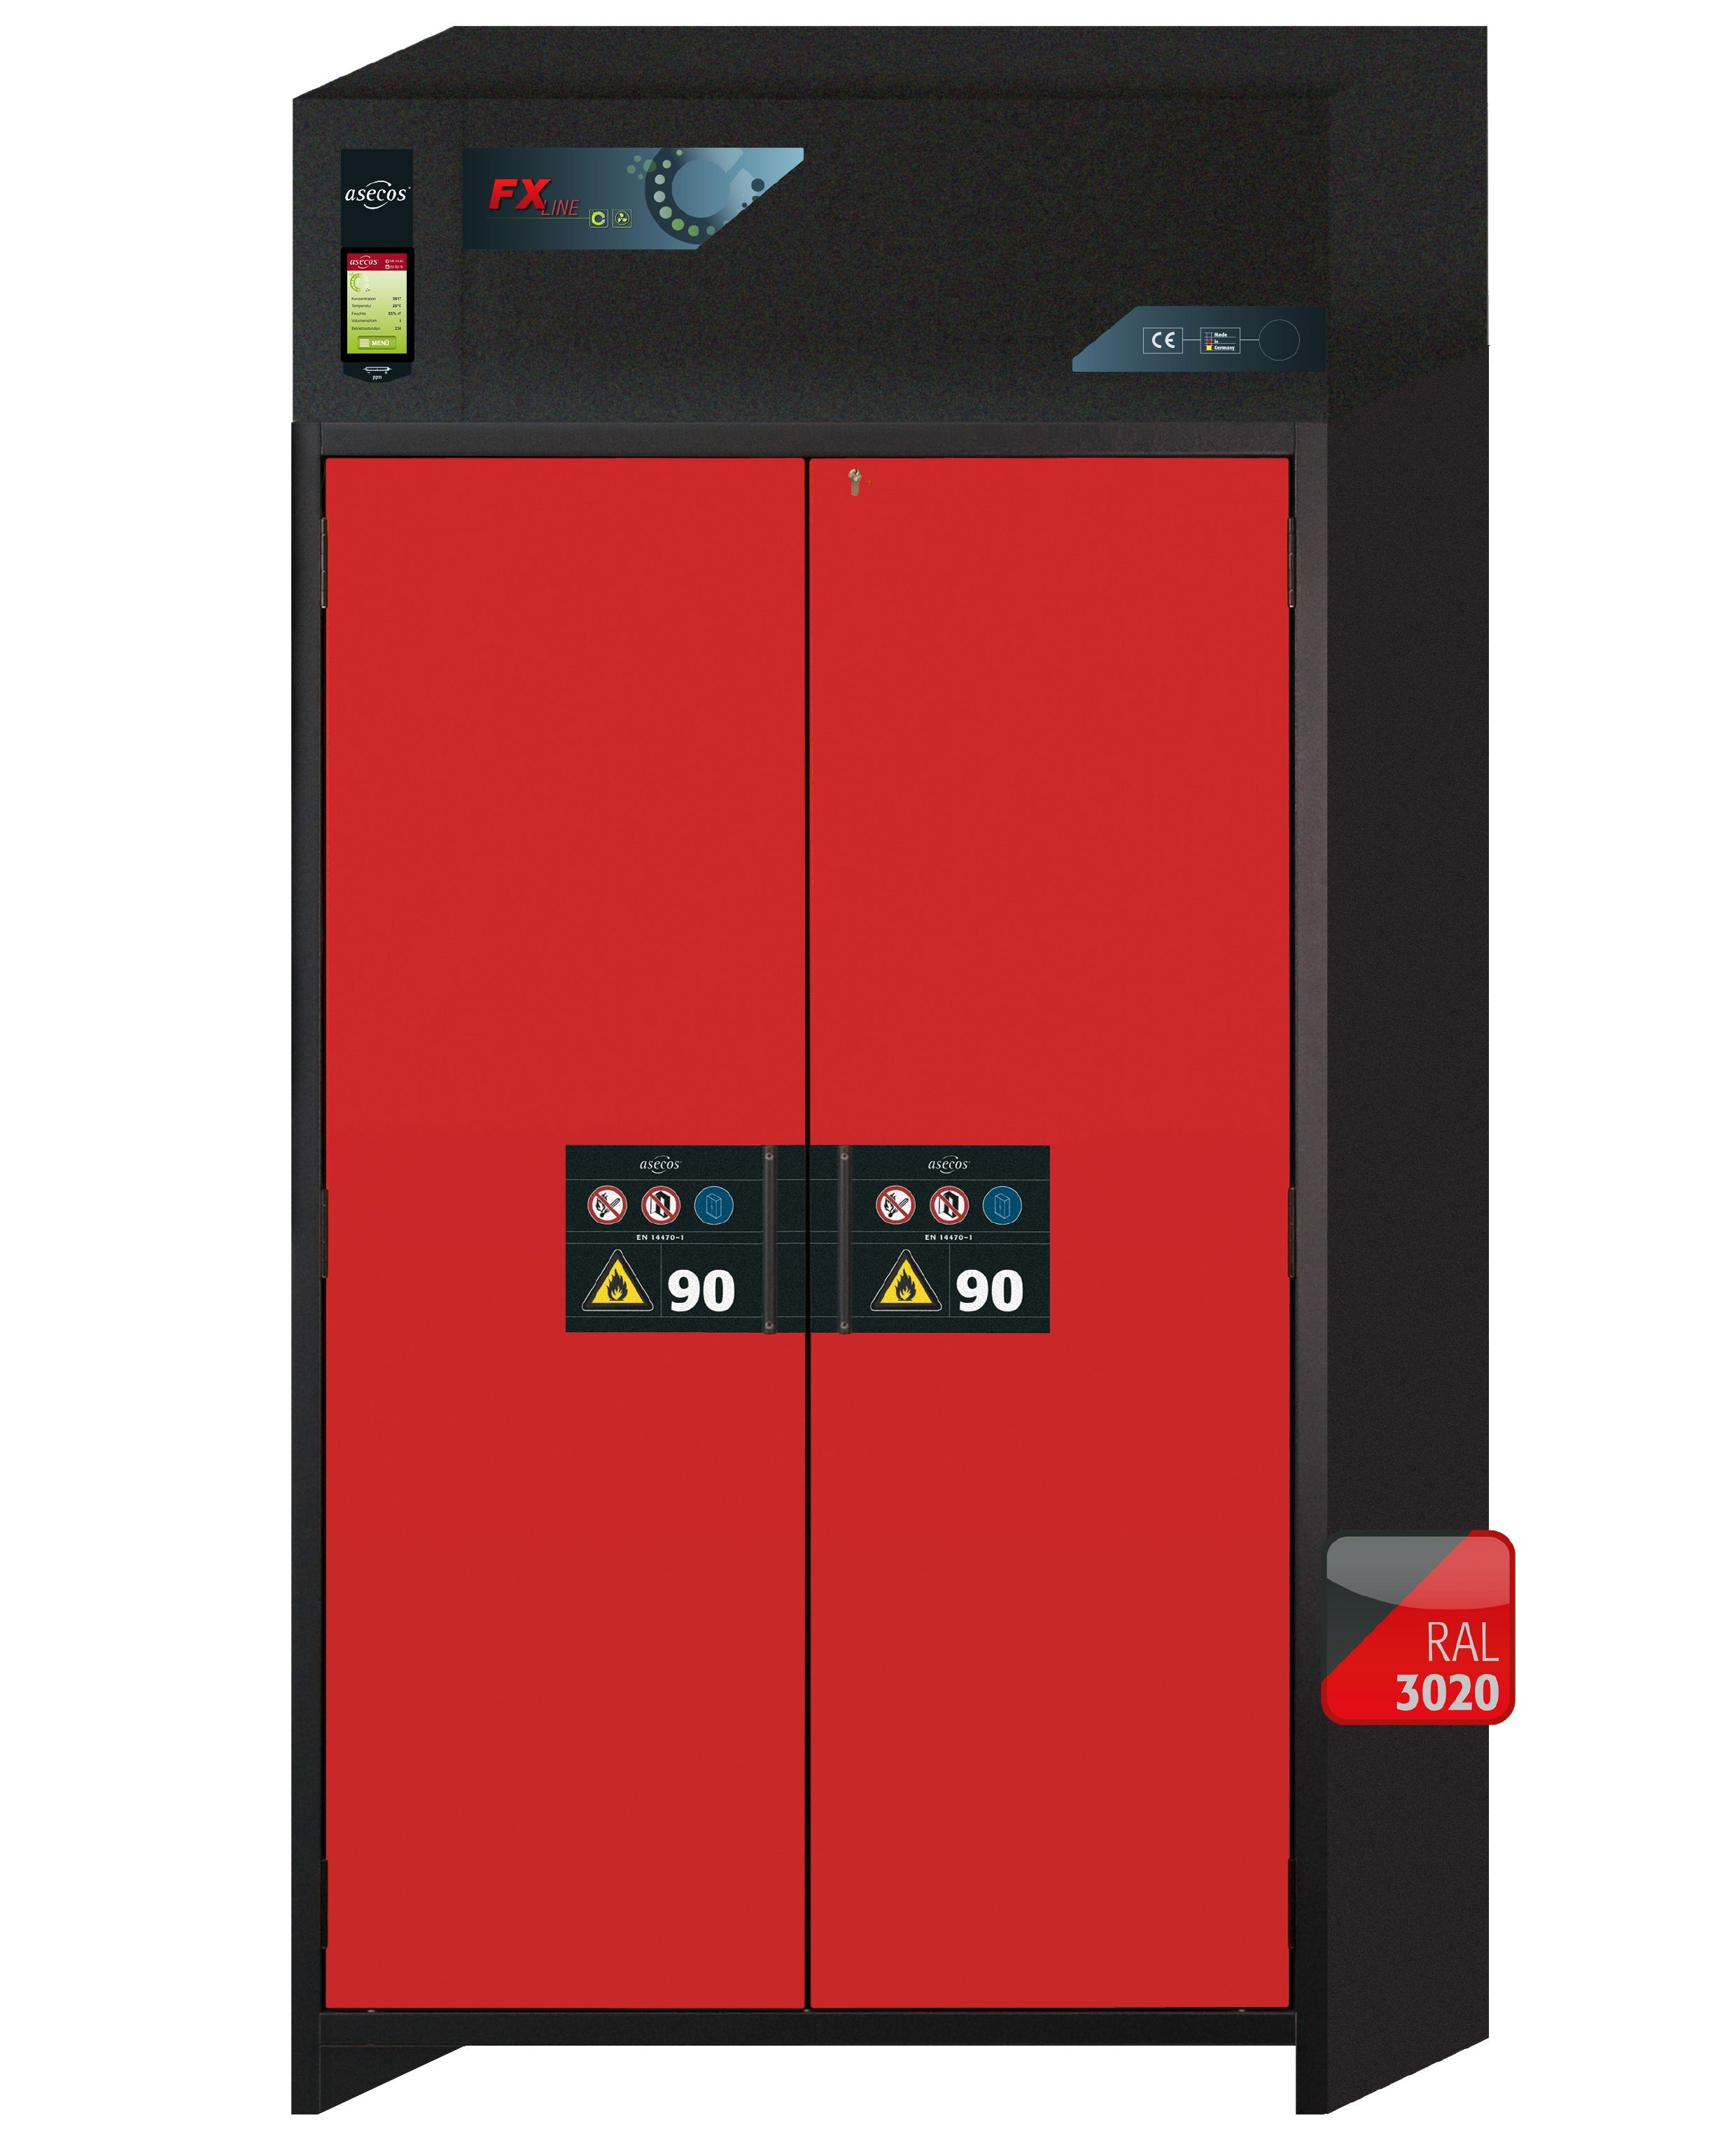 Type 90 recirculating air filter cabinet FX-CLASSIC-90 model FX90.229.120.MV in traffic red RAL 3020 with 6x standard pull-out tray (sheet steel)